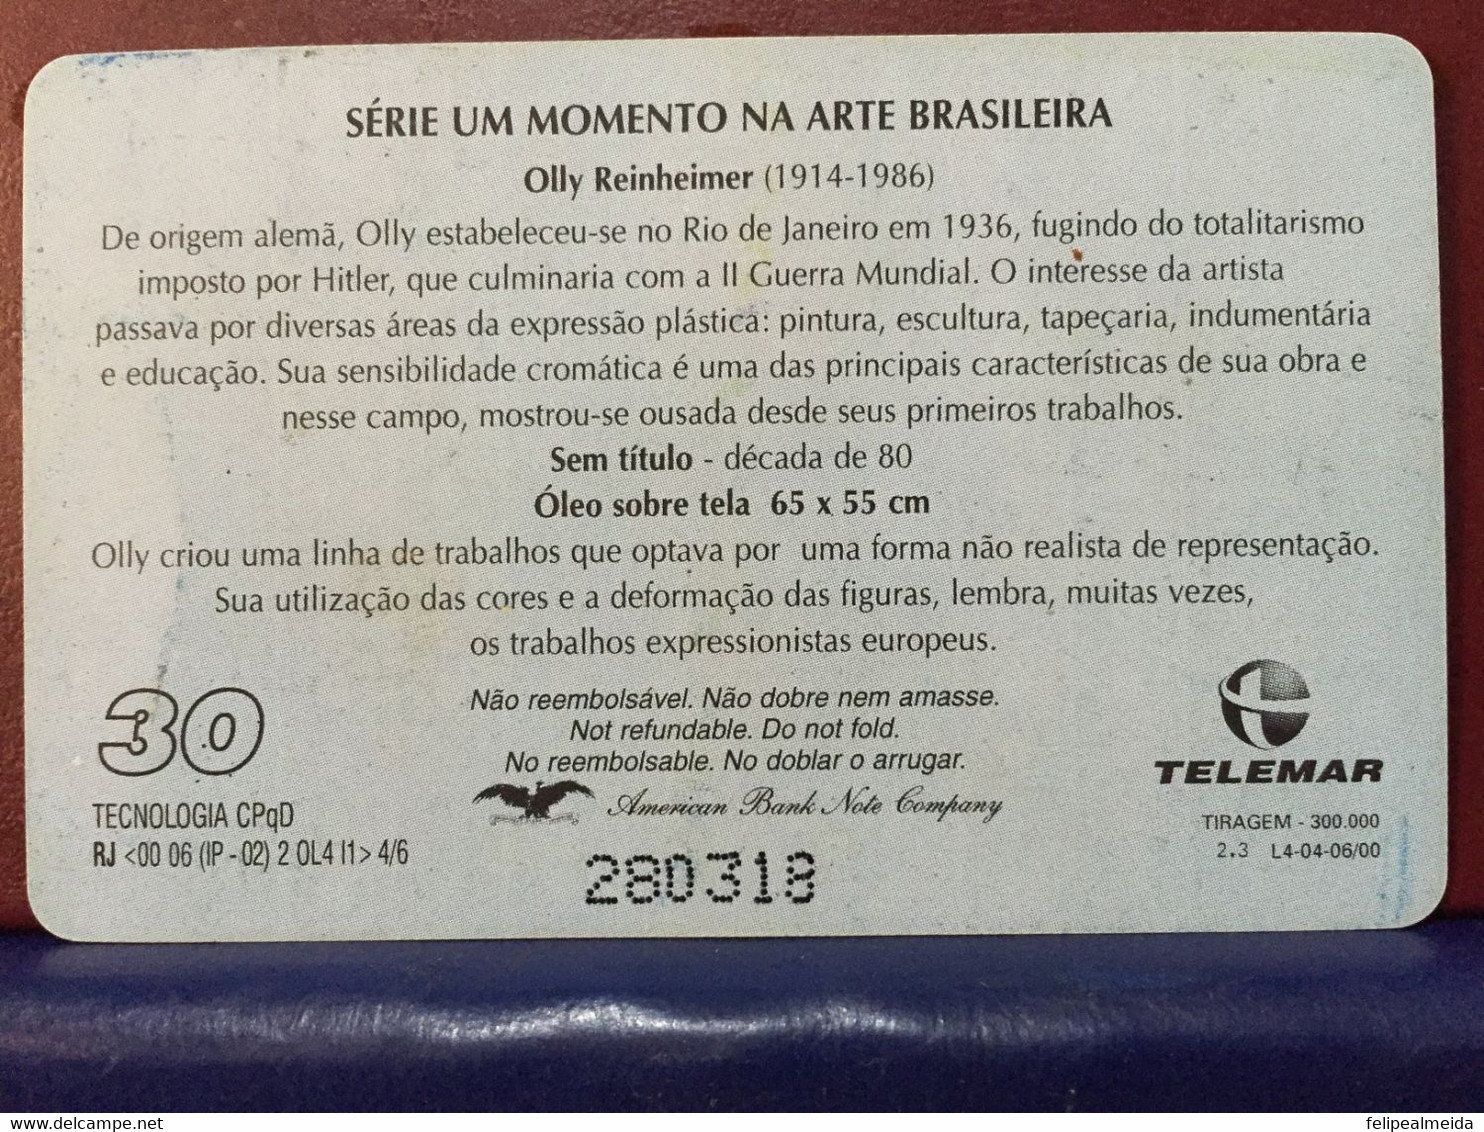 Phone Card Manufactured By Telemar In 2000 - Series A Moment In Brazilian Art - Artist Olly Reinheimer - Painting